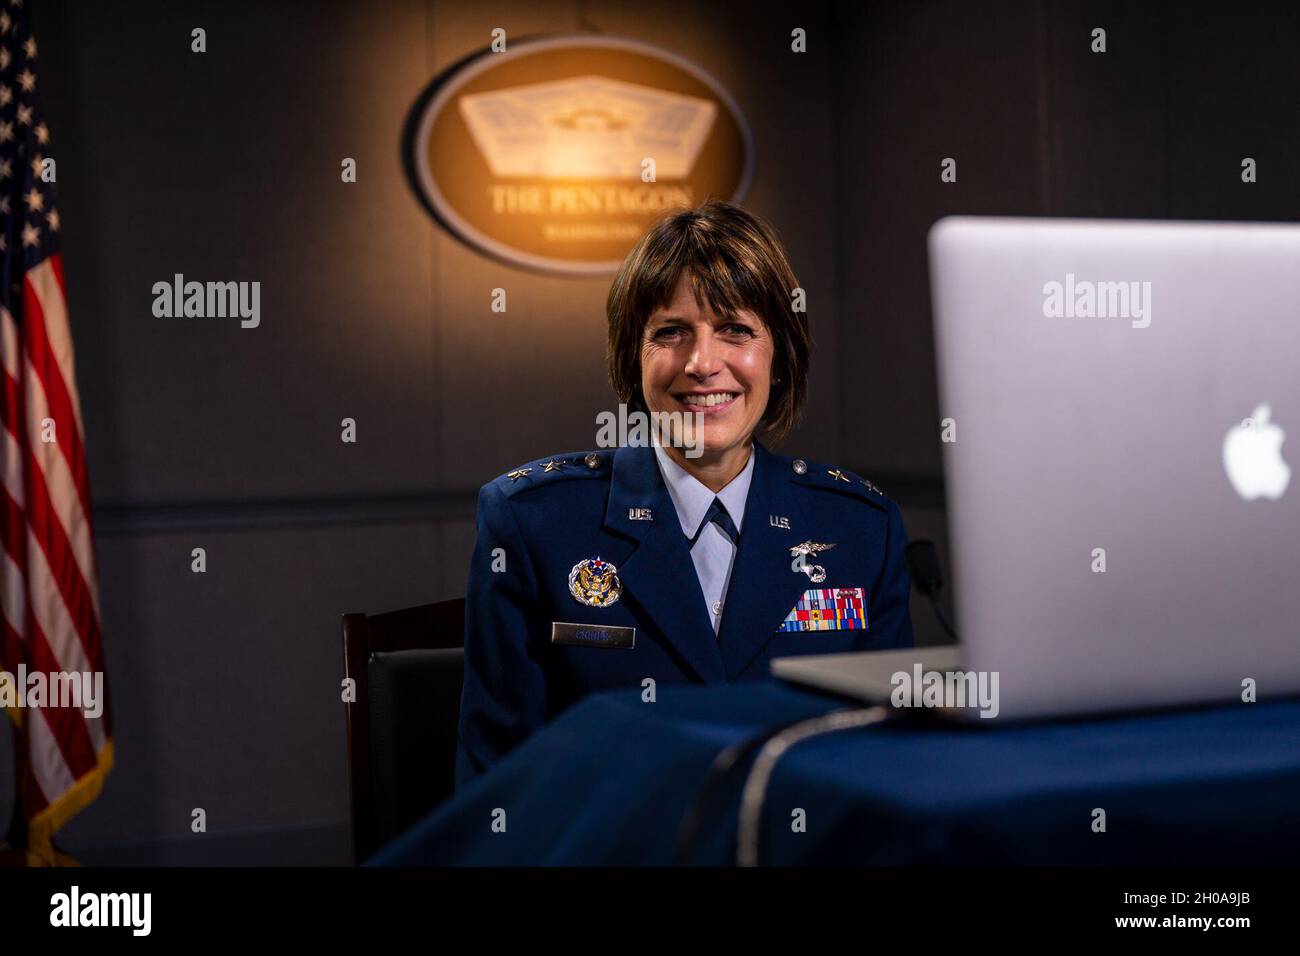 The Chief Technology and Innovation Officer for the U.S. Space Force, Maj. Gen. Kimberly A. Crider, delivers remarks virtually to the Potomac Officer’s Club 5G Summit, the Pentagon, Washington, D.C., Jan. 7, 2021. Stock Photo